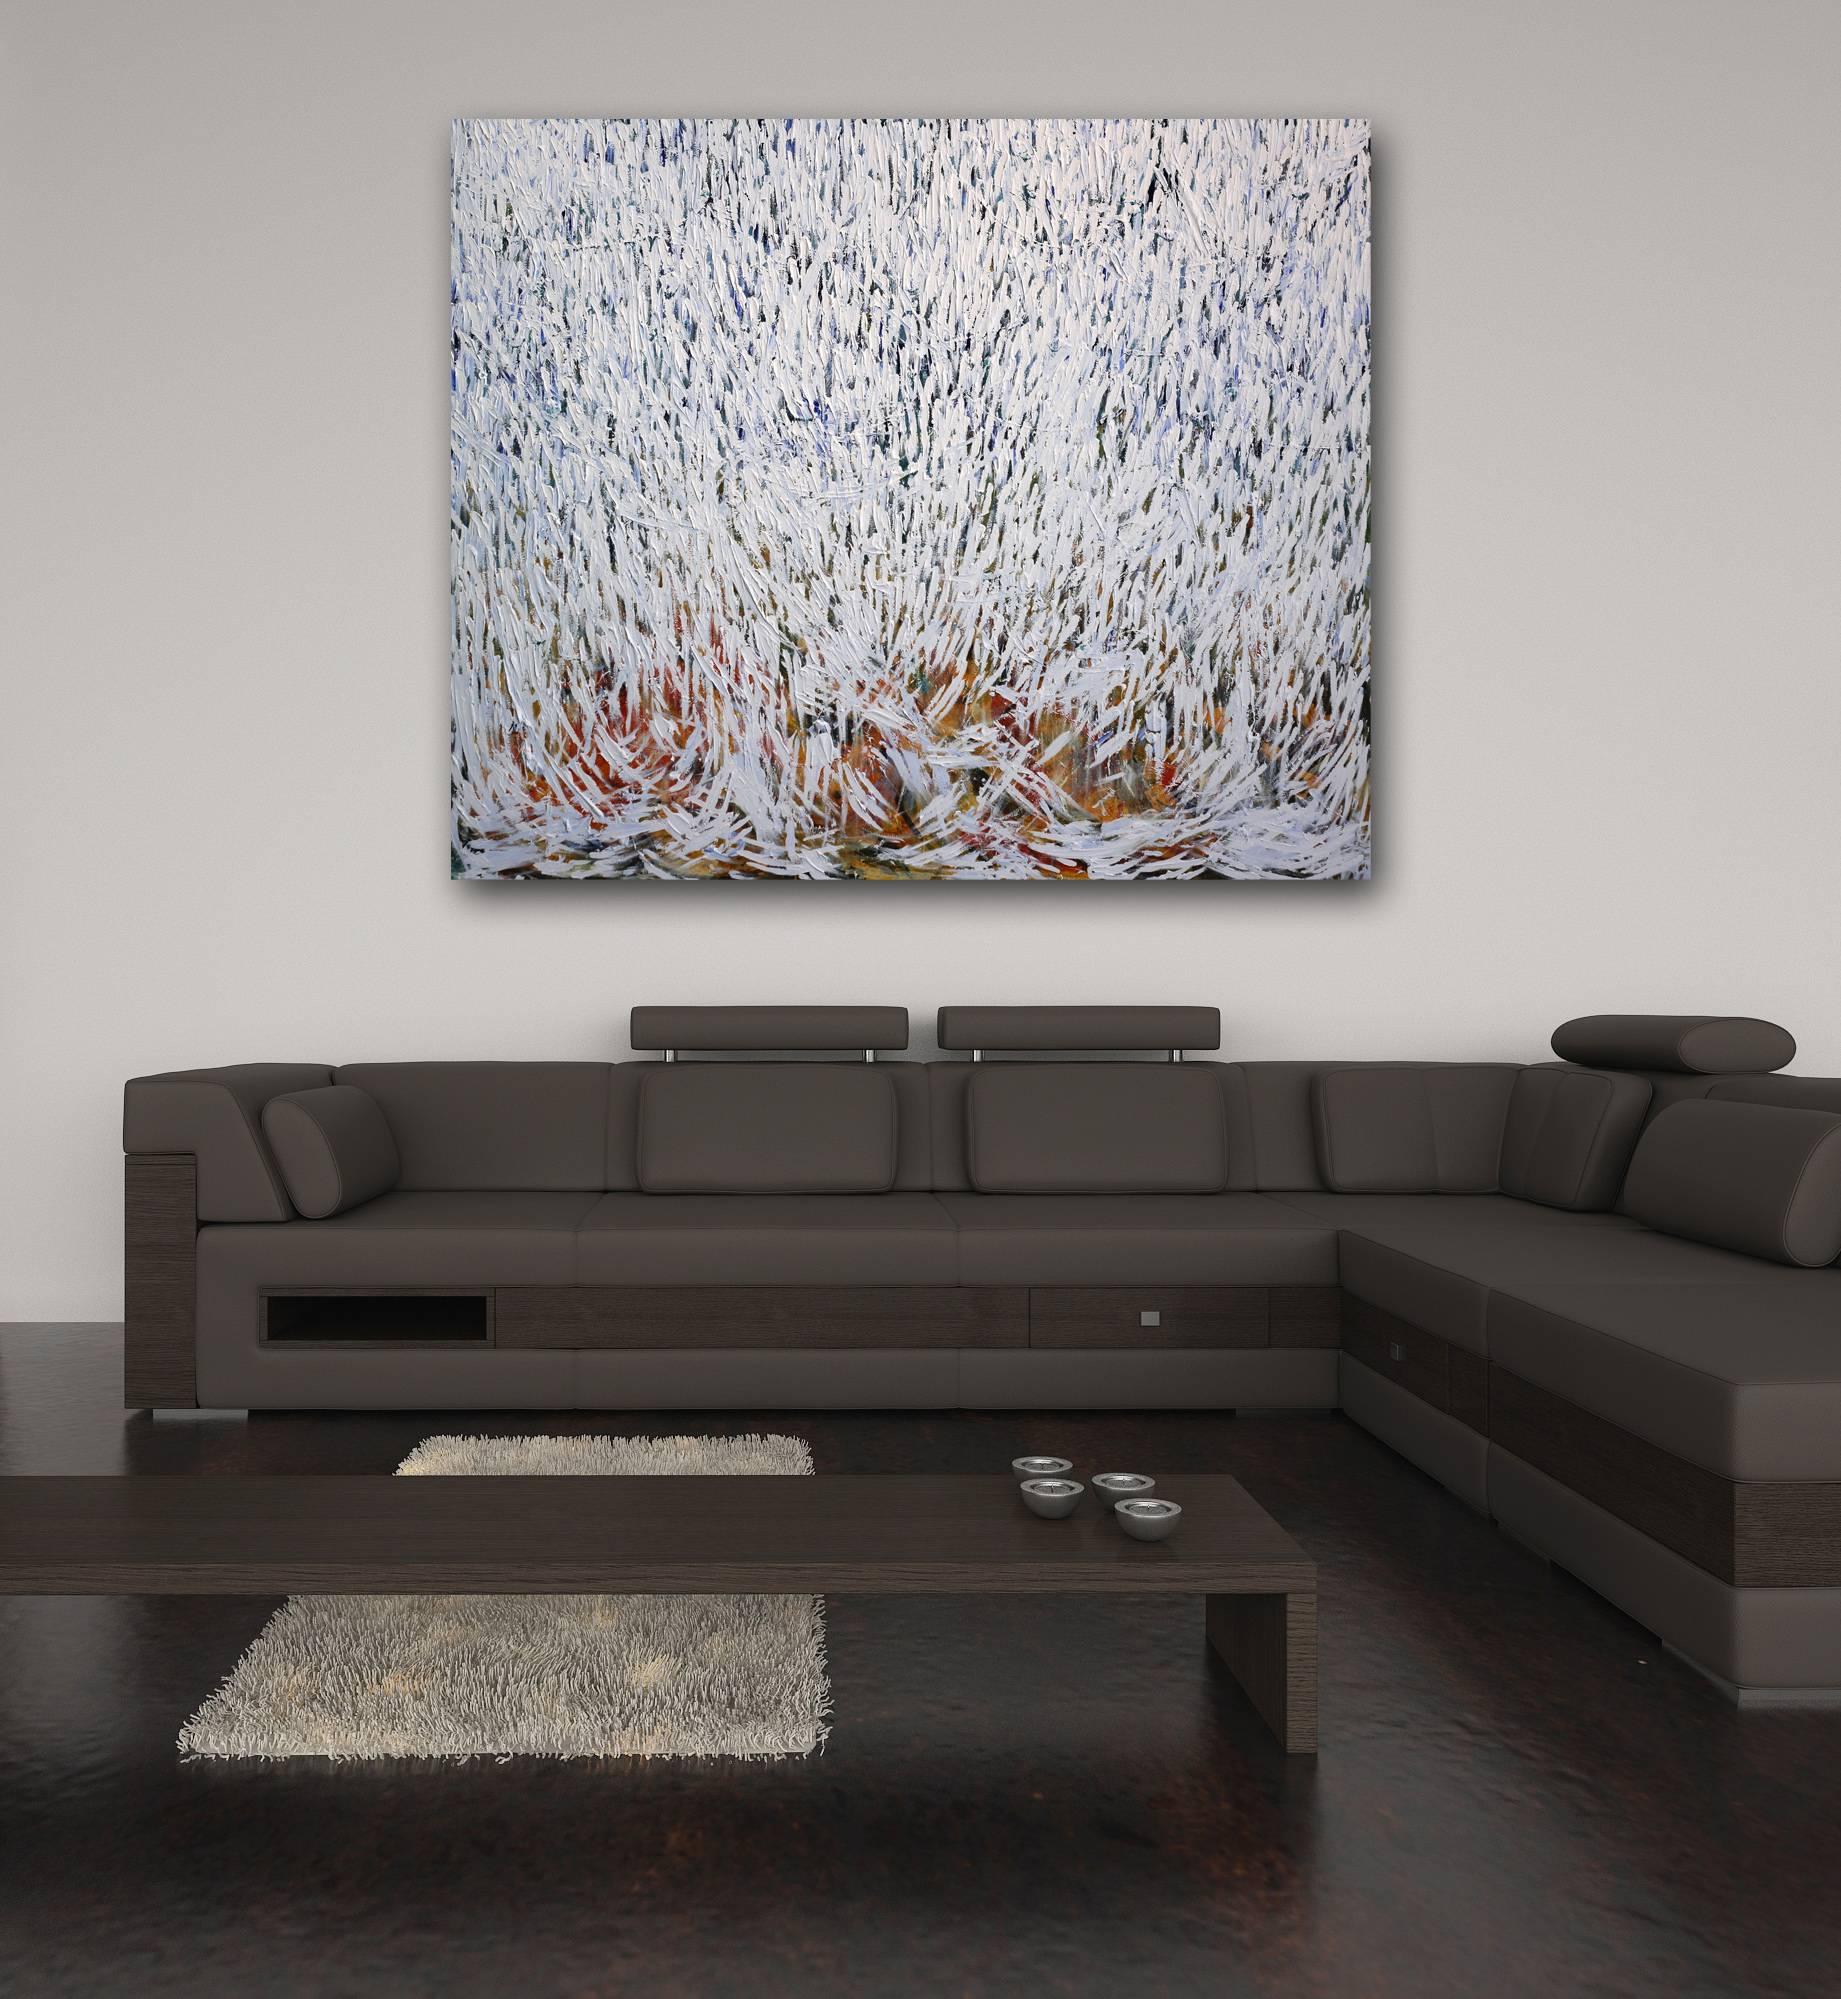 Where the Poppies Grow - Abstract Expressionist Painting by Shauna La